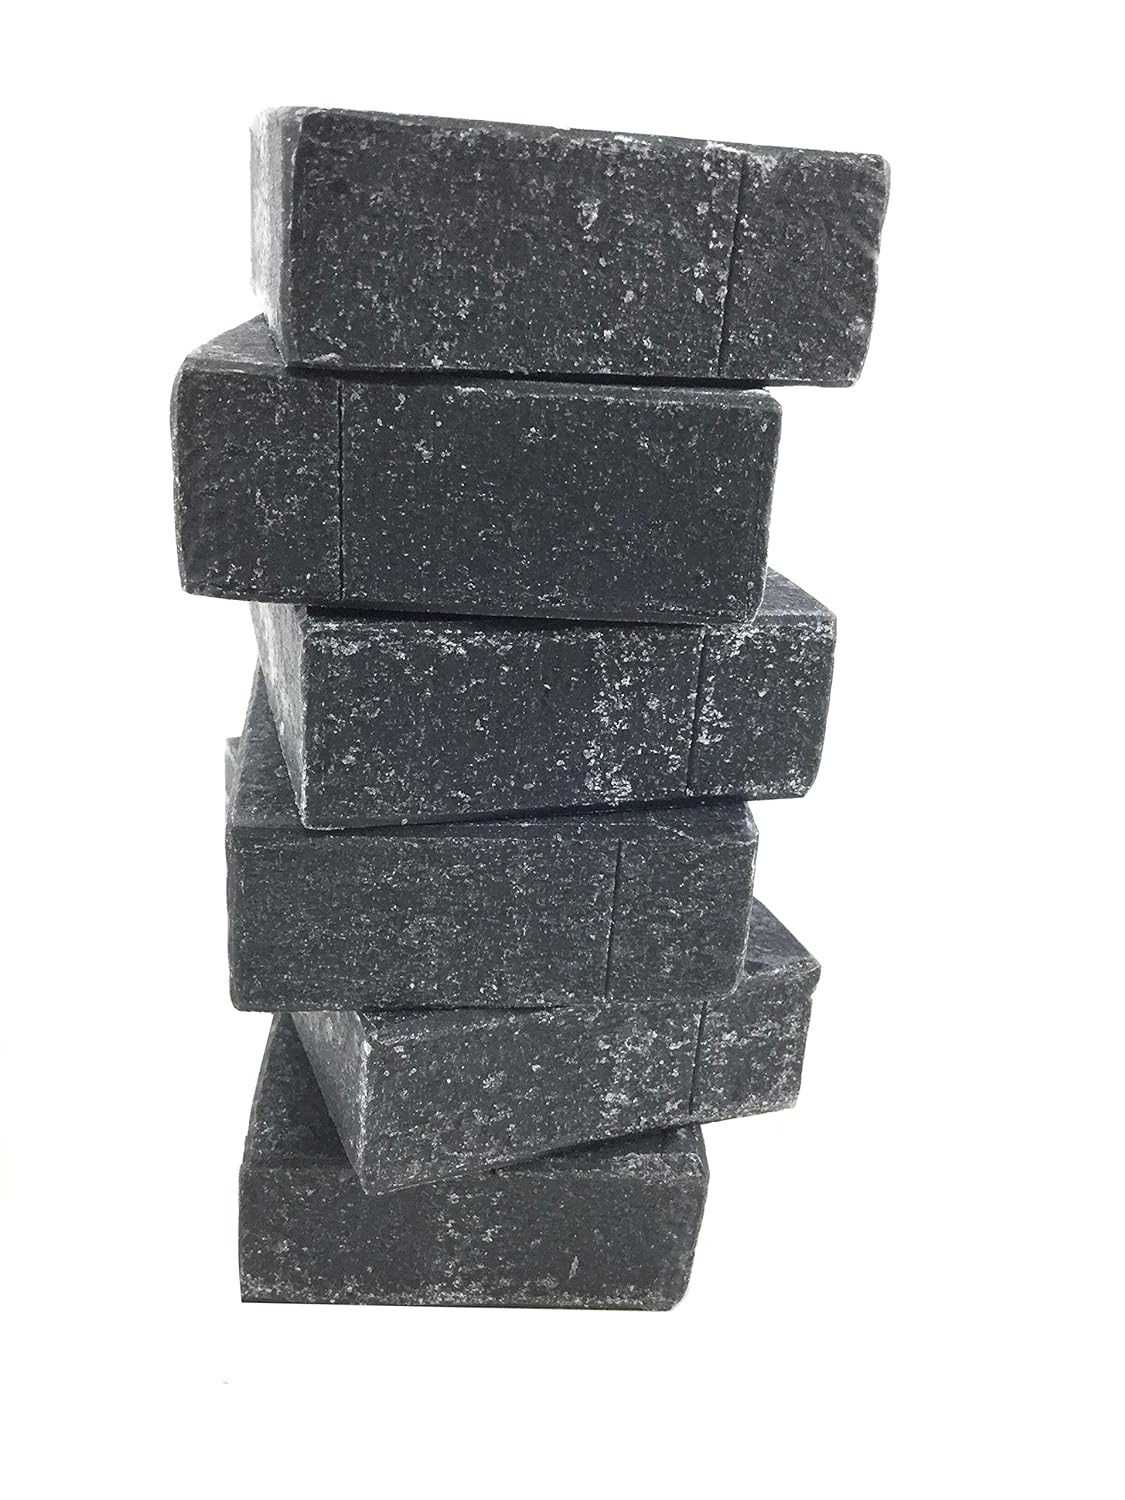 Simplici Activated Charcoal Unscented Bar Soap. Bulk 6 Pack. Palm Oil Free. Safe for Acne, Eczema, Psoriasis Safe. Body Wash For Oily Skin - Face, Facial, Hand. Black, Lye Soap 4.5  Bars